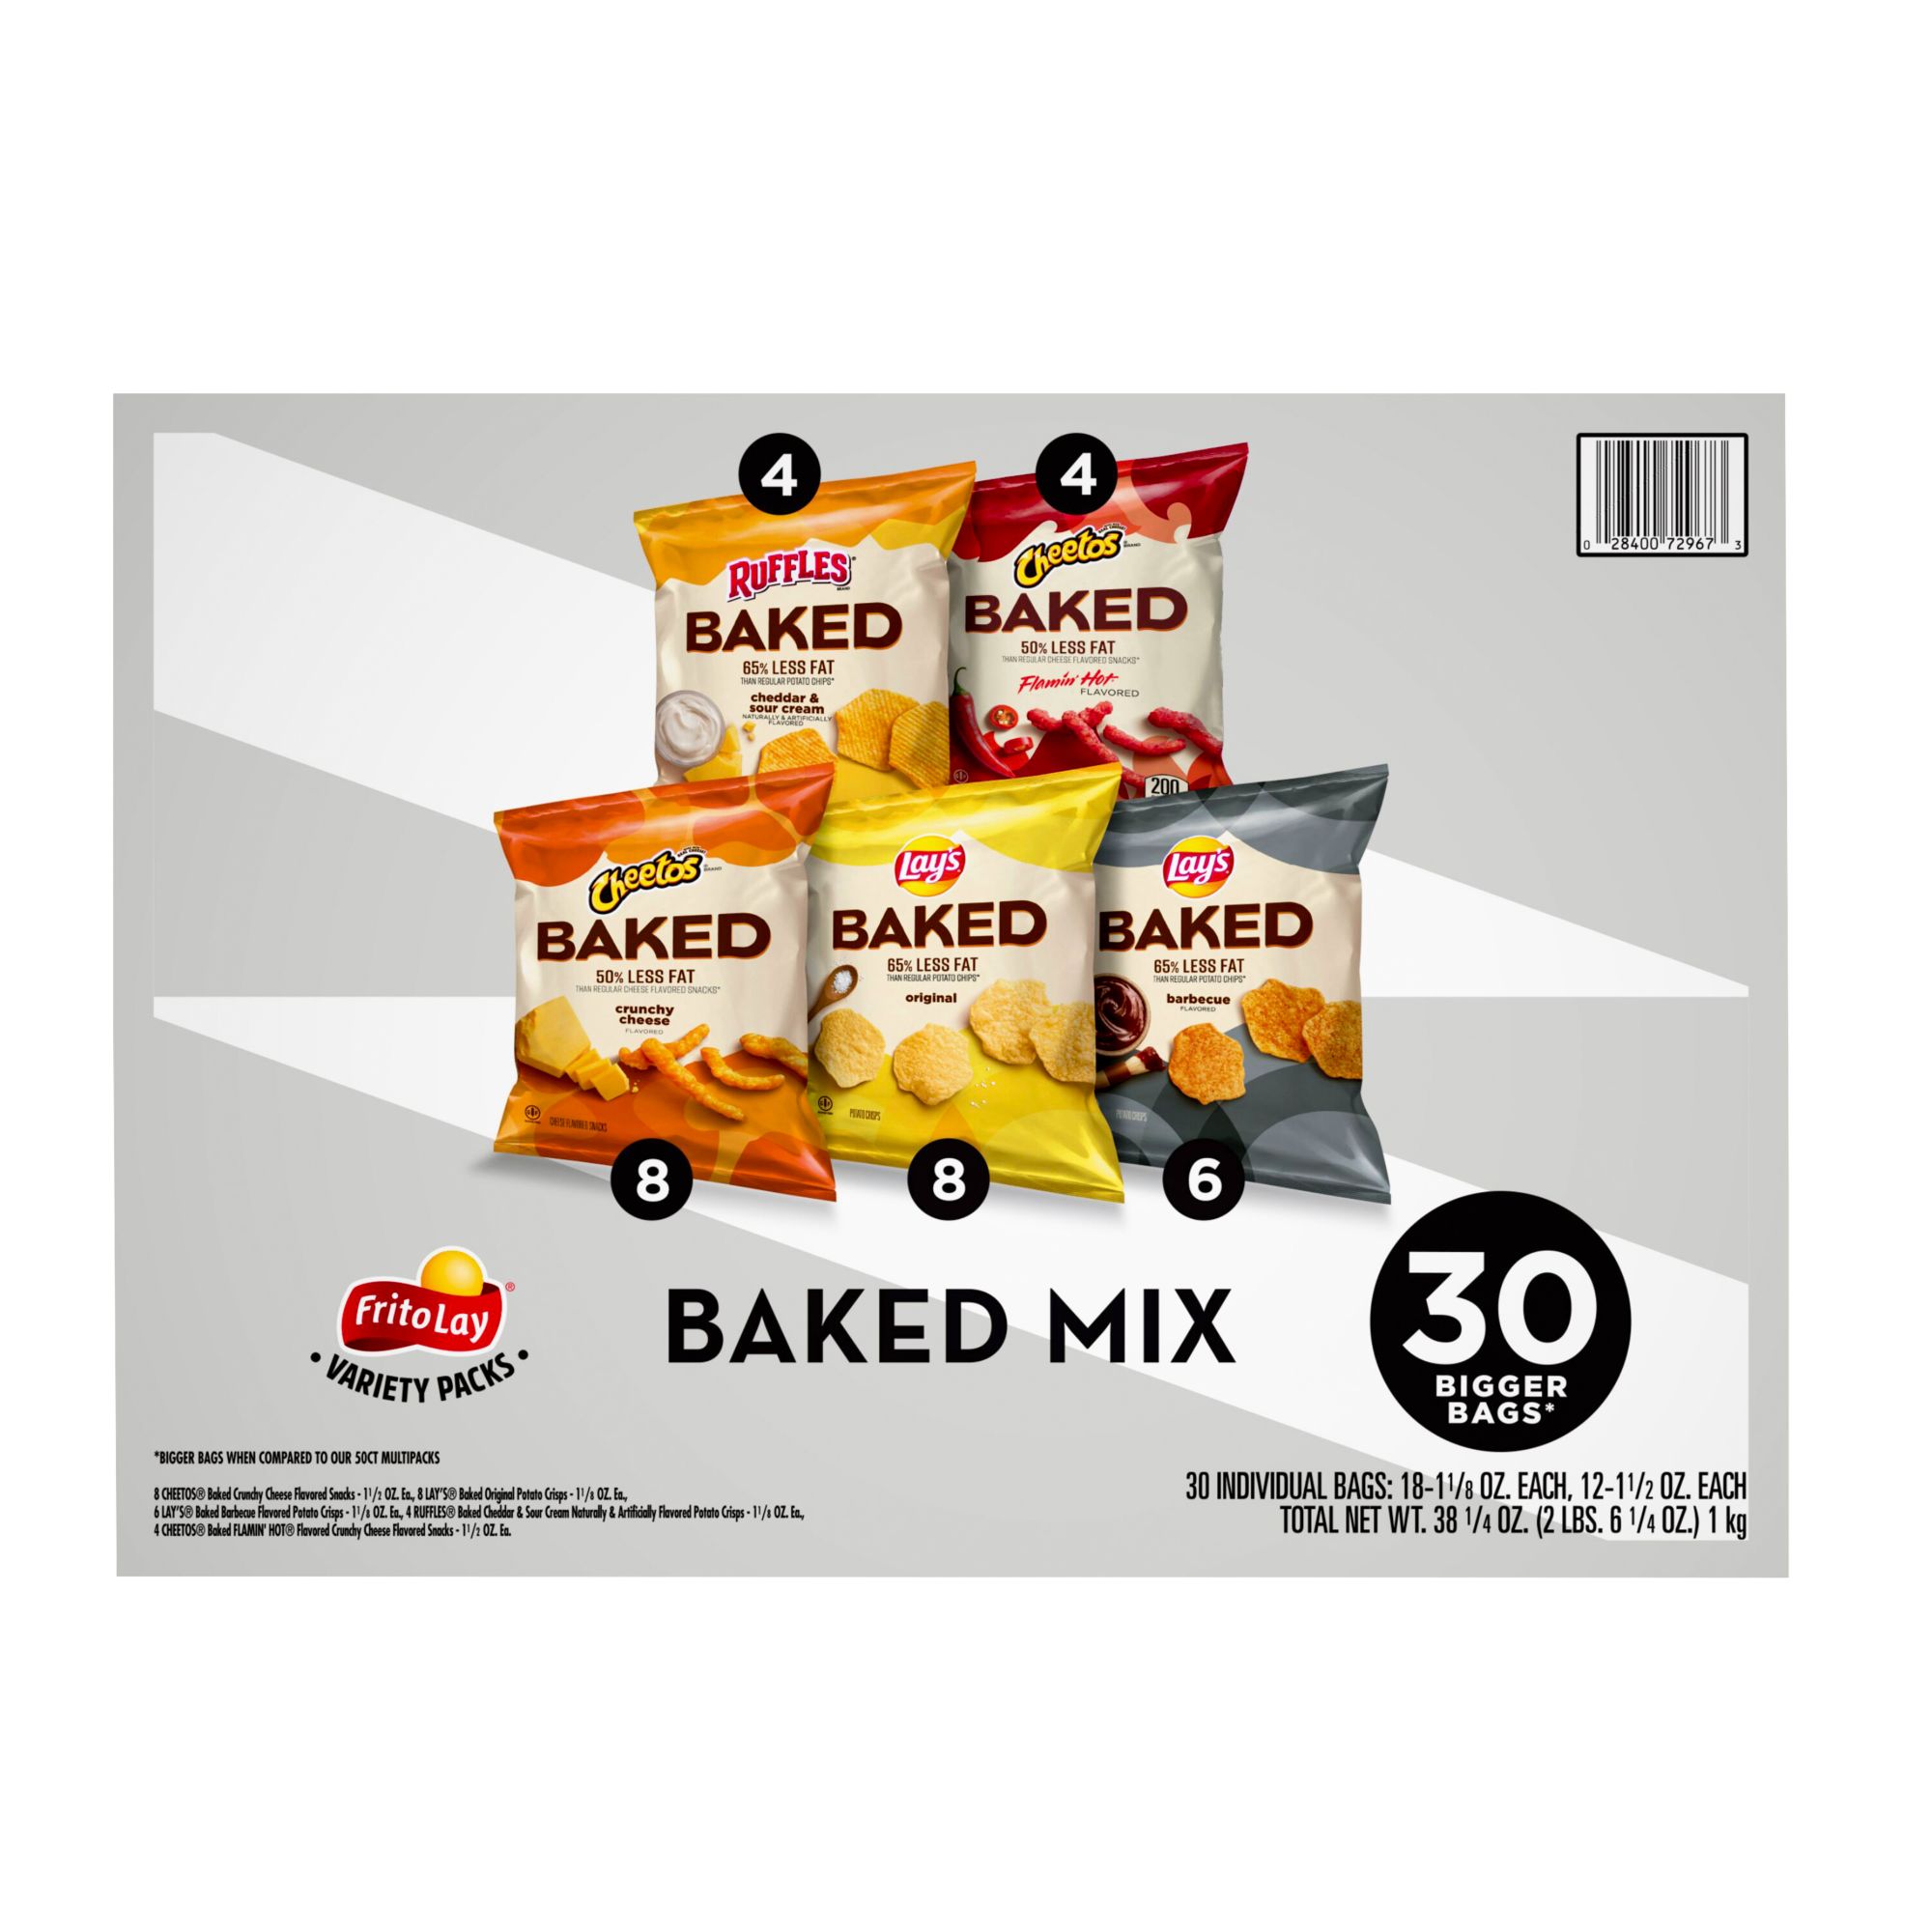 Lay's Chips Baked